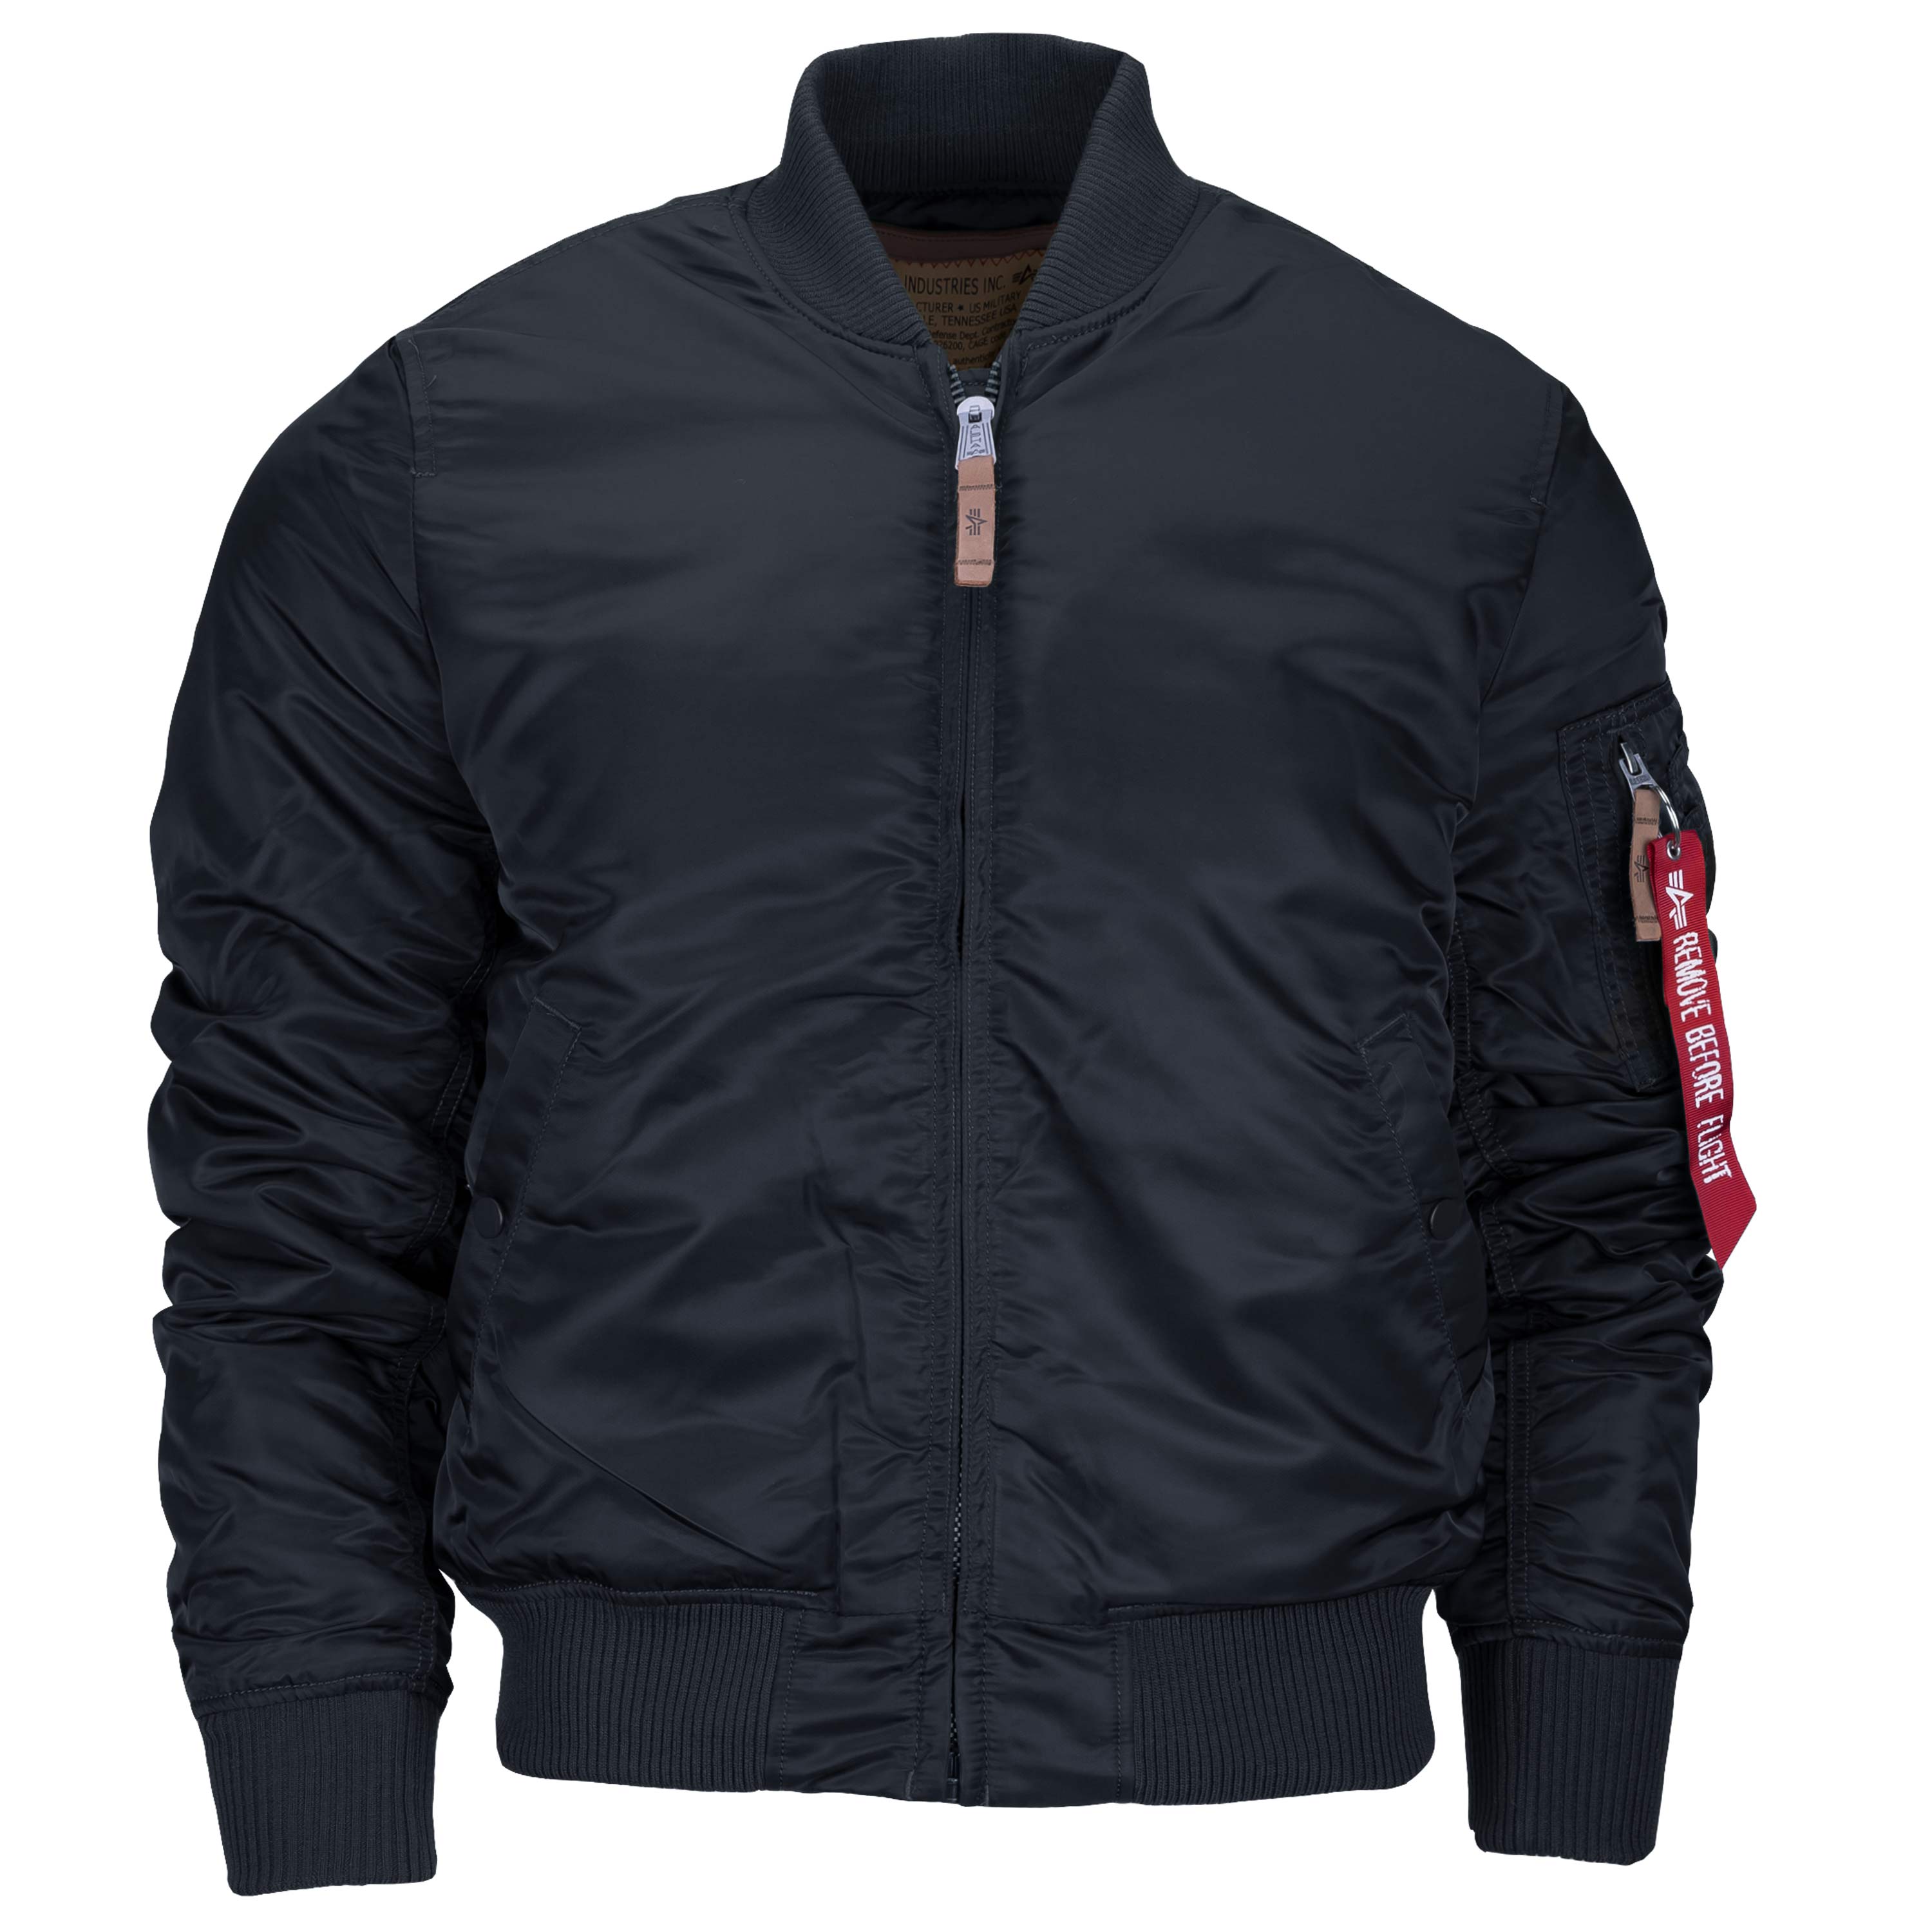 Purchase The Alpha Industries Jacket Ma 1 Vf 59 Schwarz By Asmc